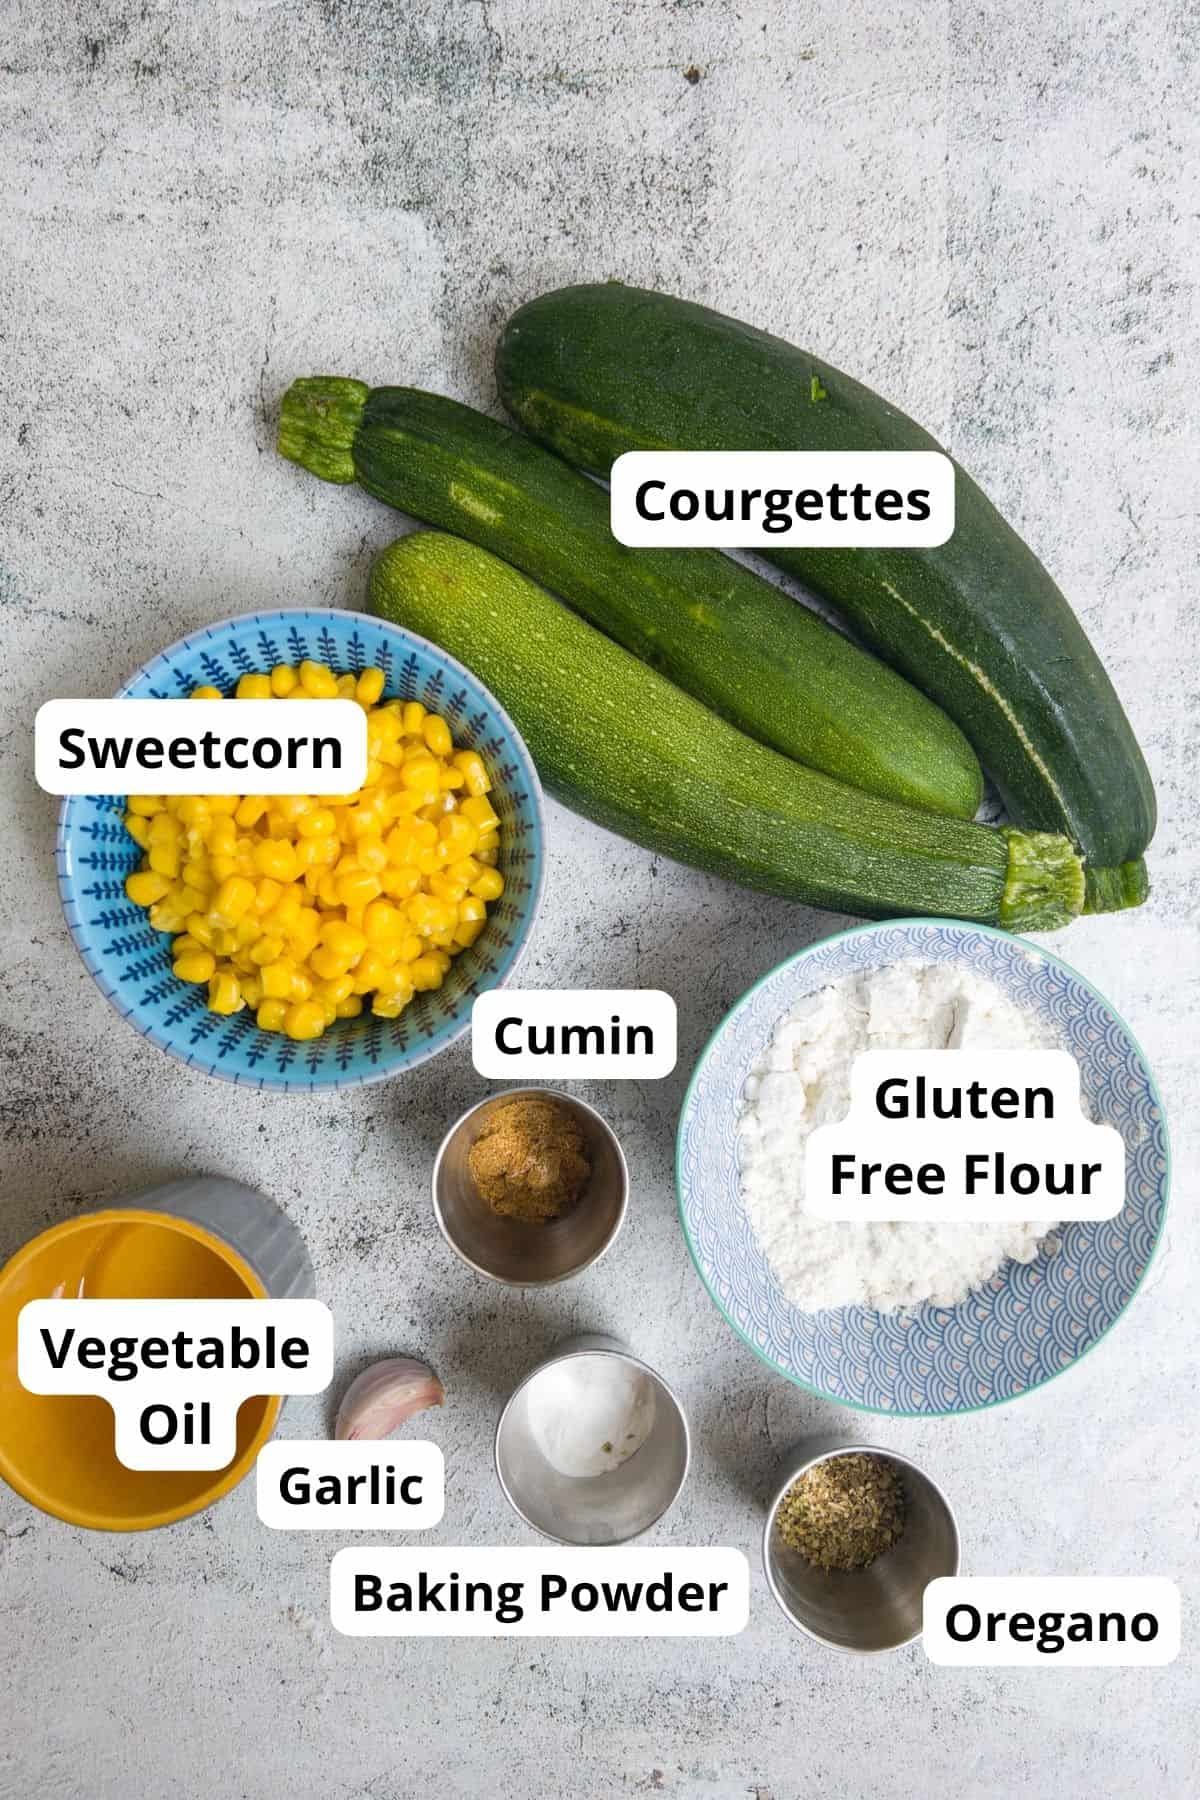 ingredients laid out to make courgette & sweetcorn fritters